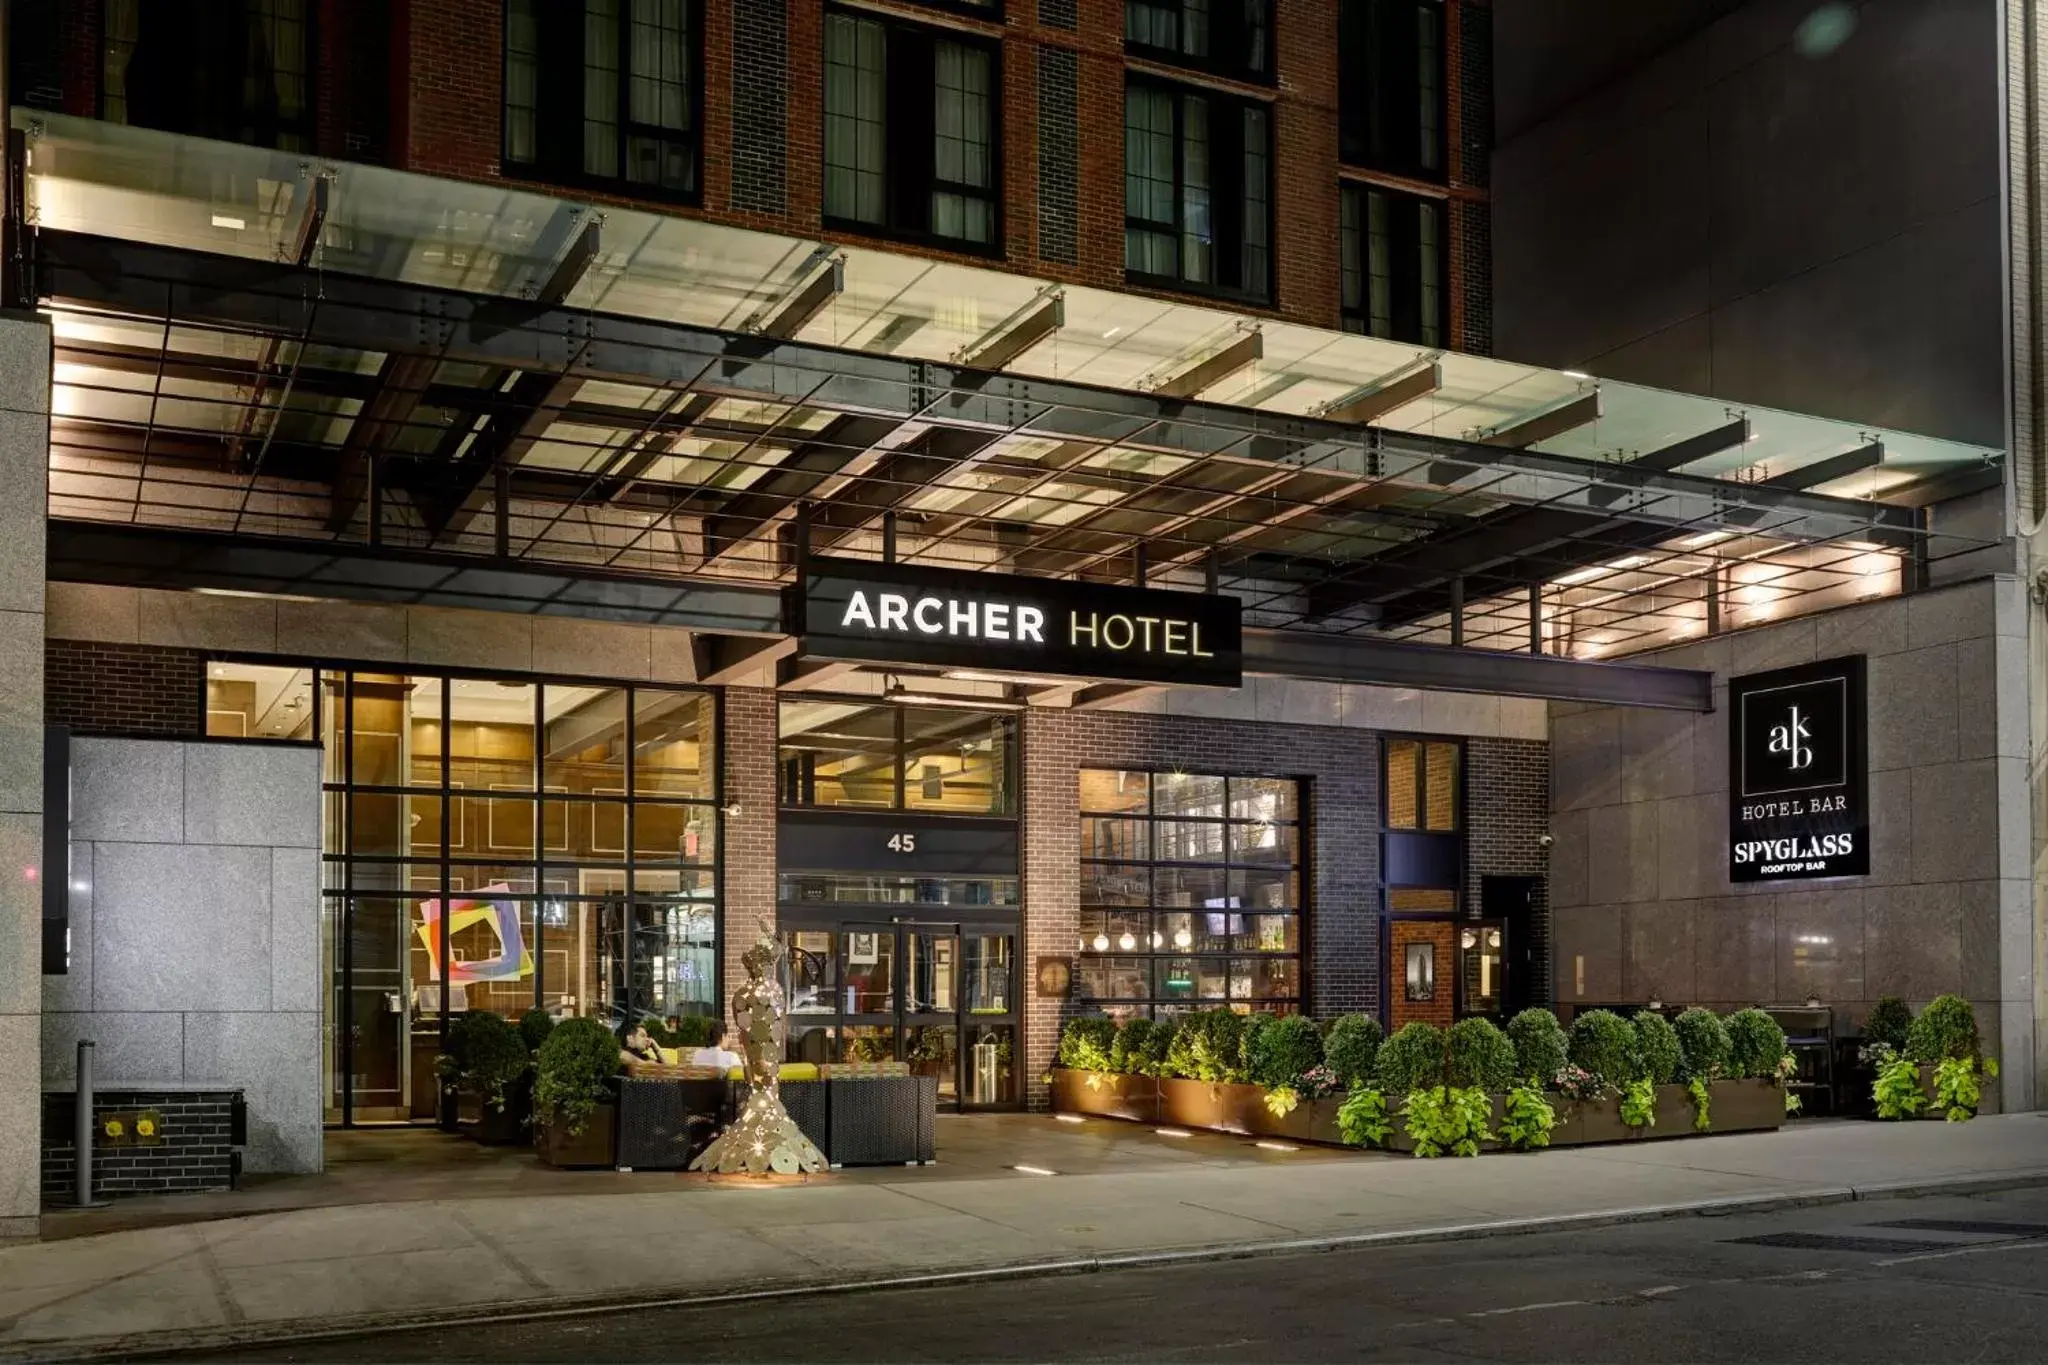 Property building in Archer Hotel New York